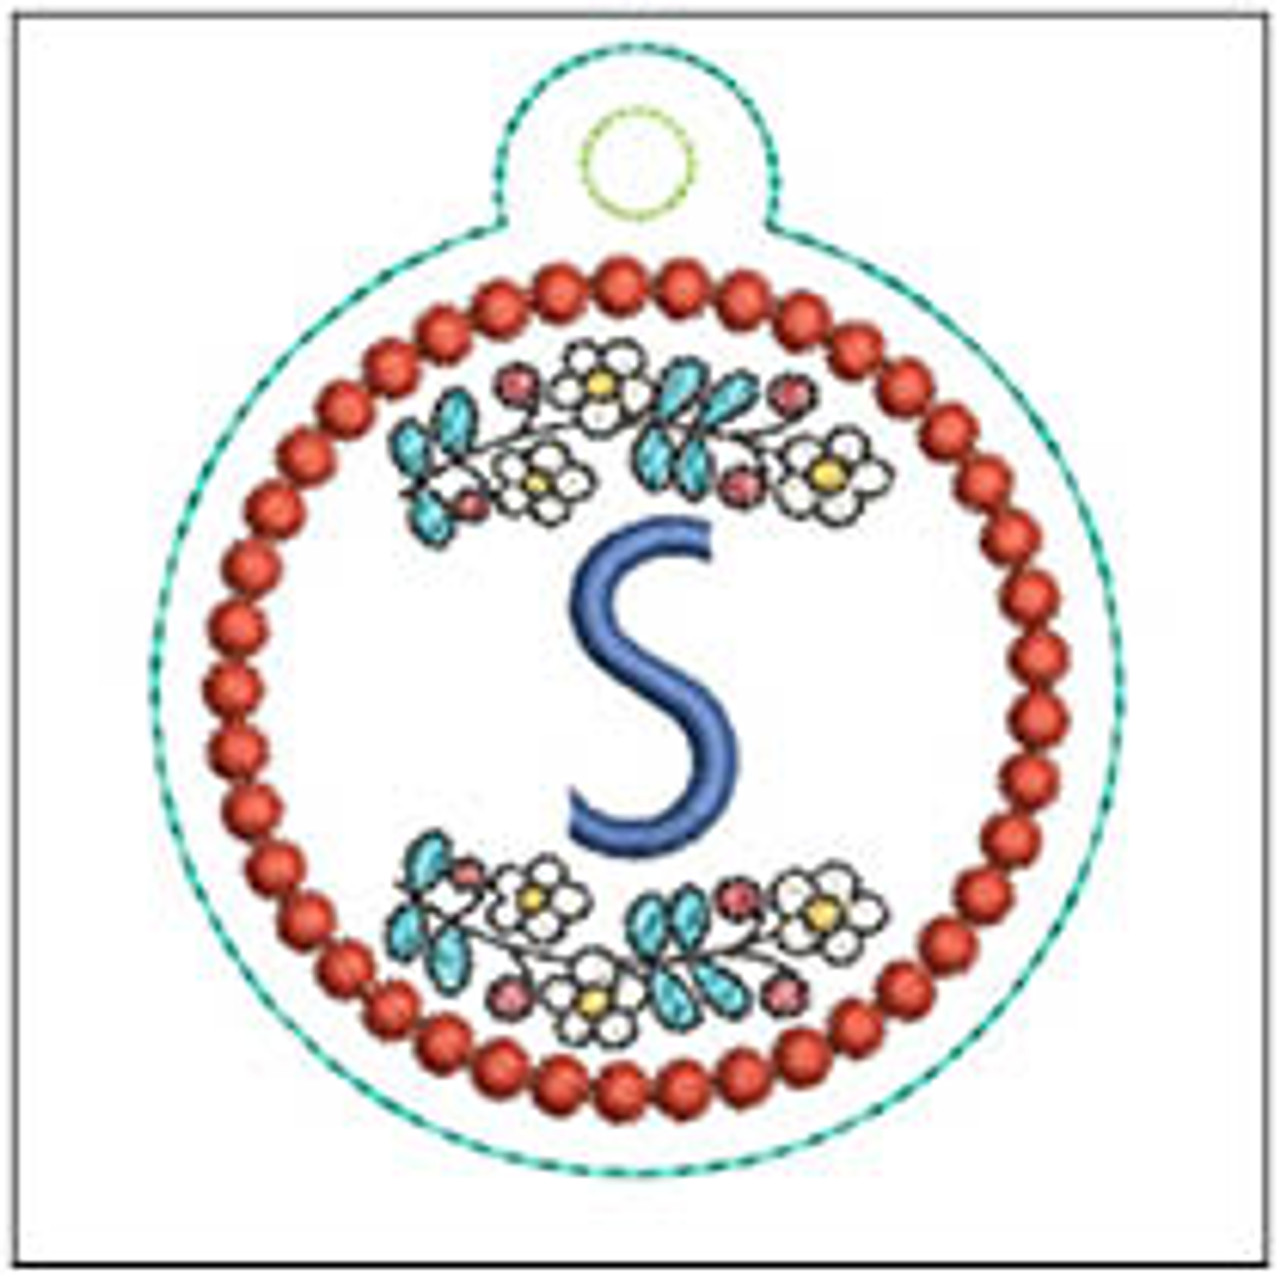 Lip Balm Holder ABCs - A - Fits a 4x4 Hoop, Machine Embroidery Pattern